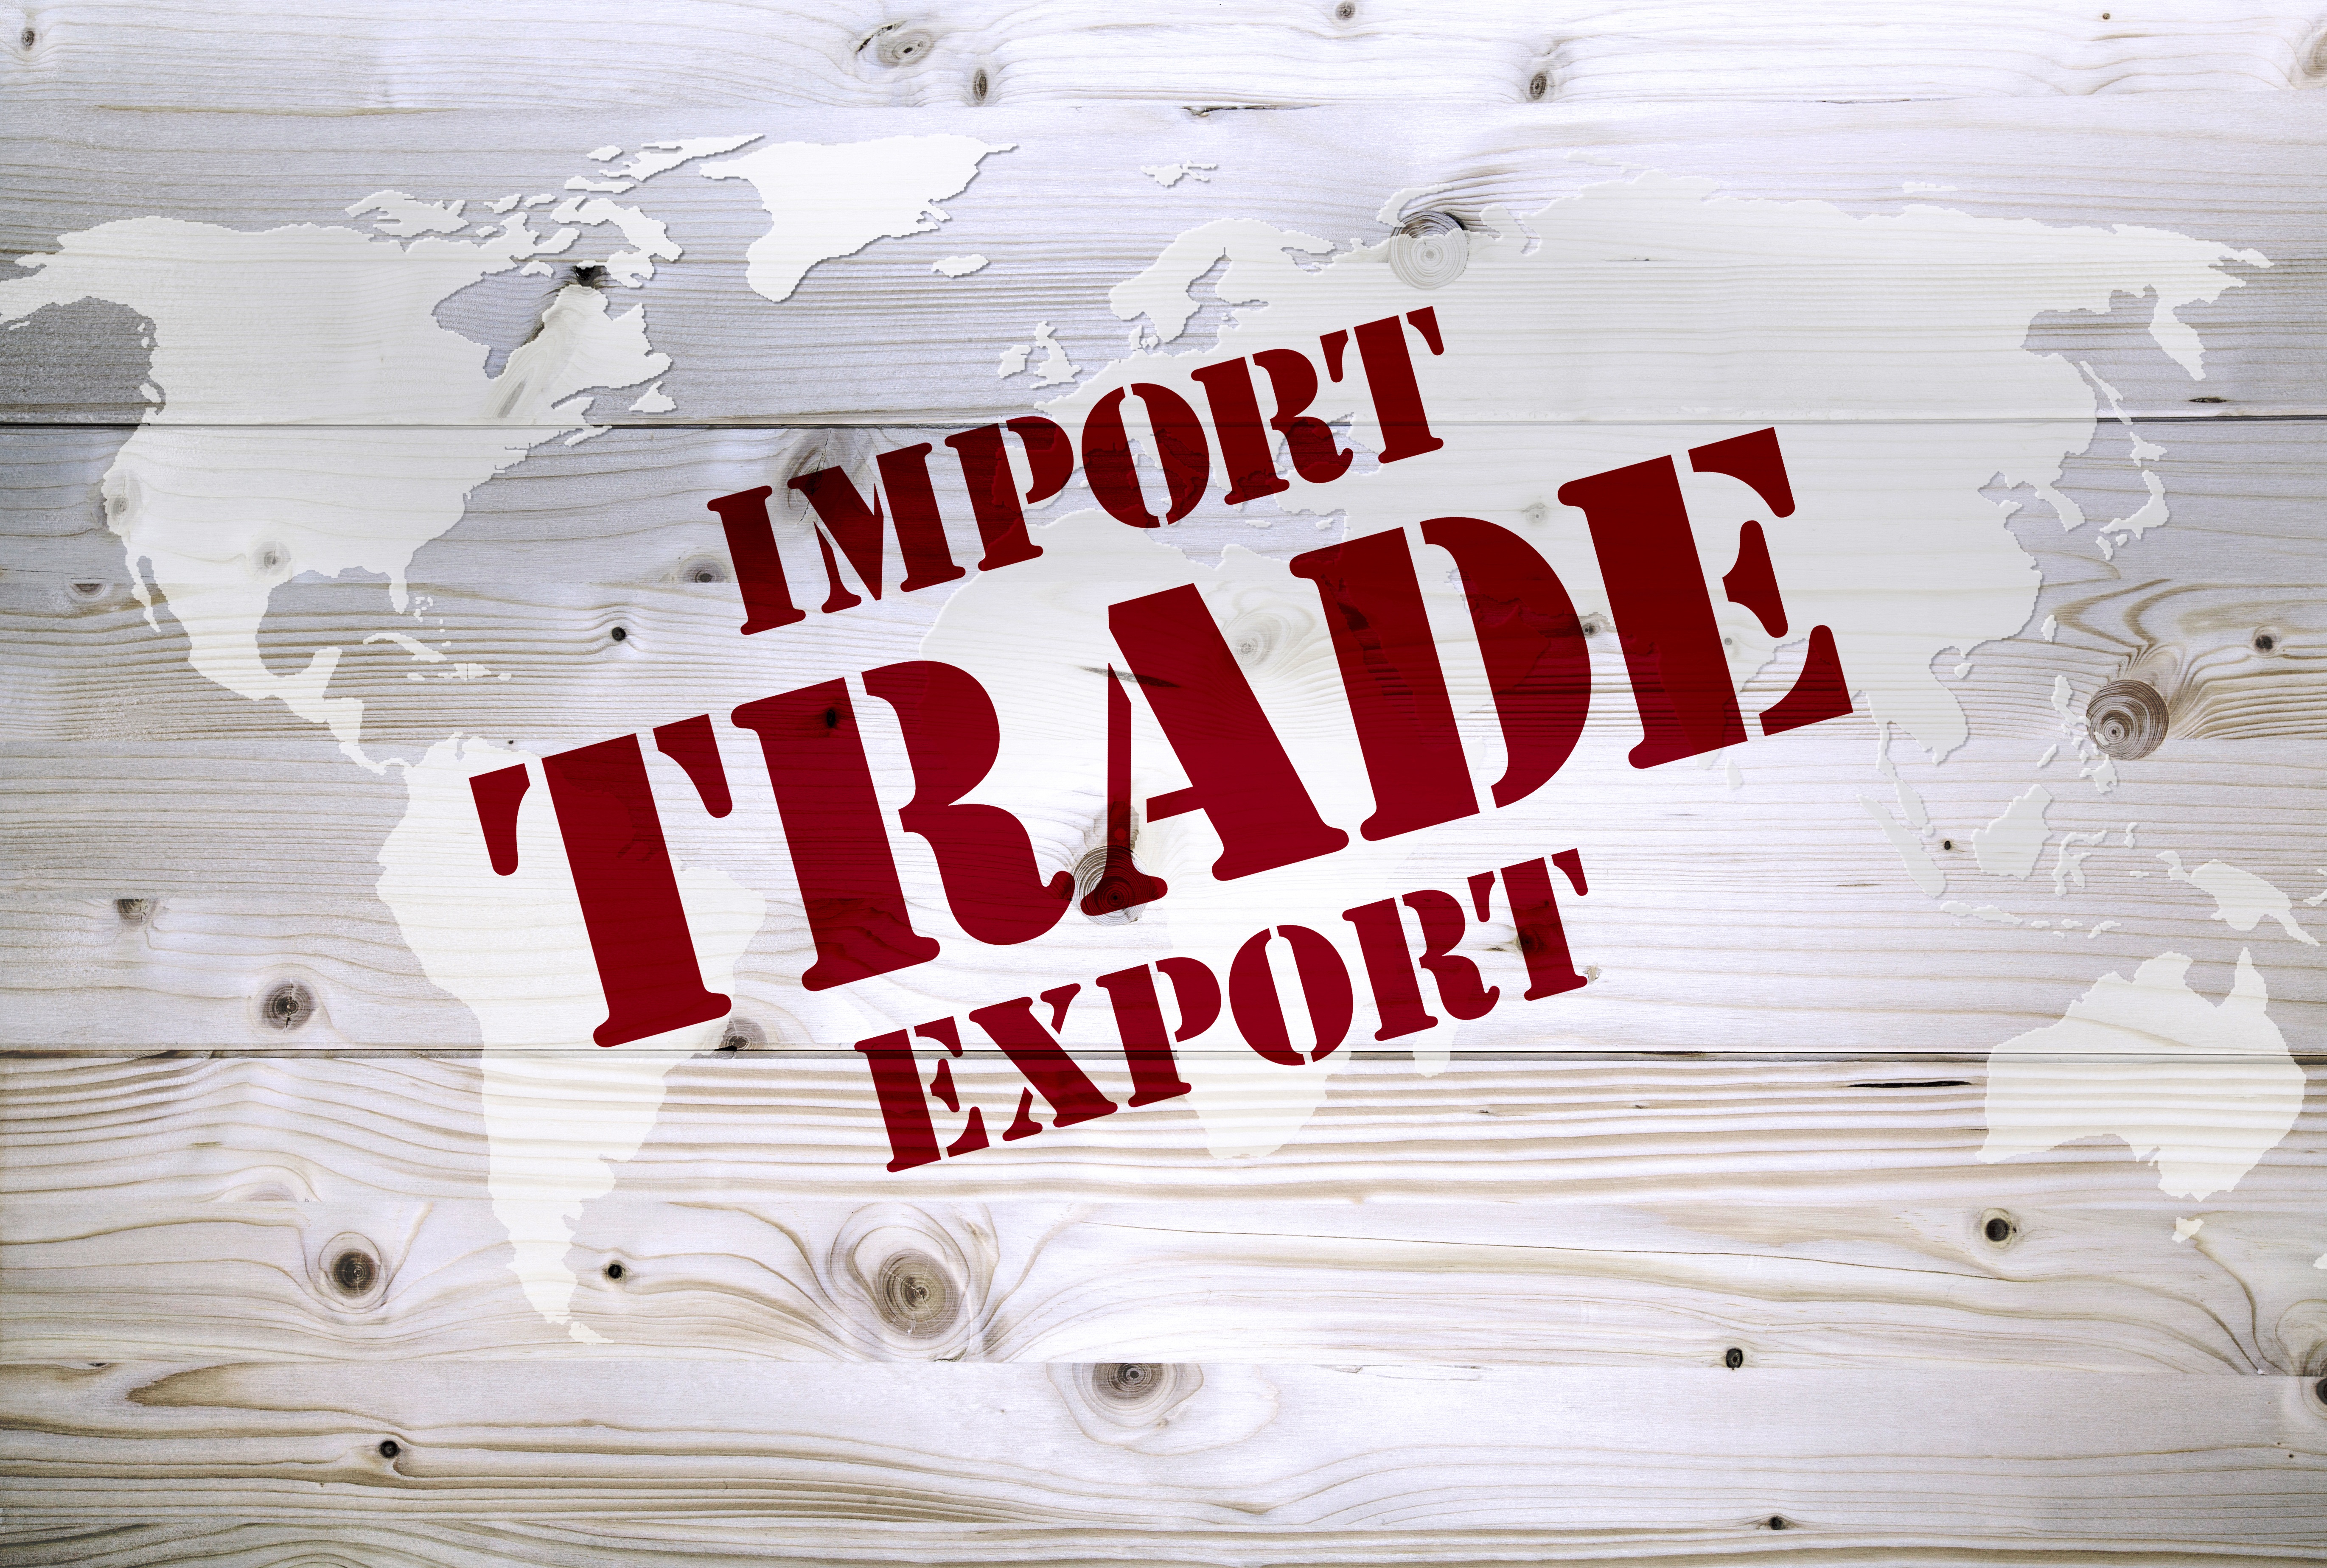 US – Asia Trade Relations:  Fast Track Trade Promotion Approved by Senate